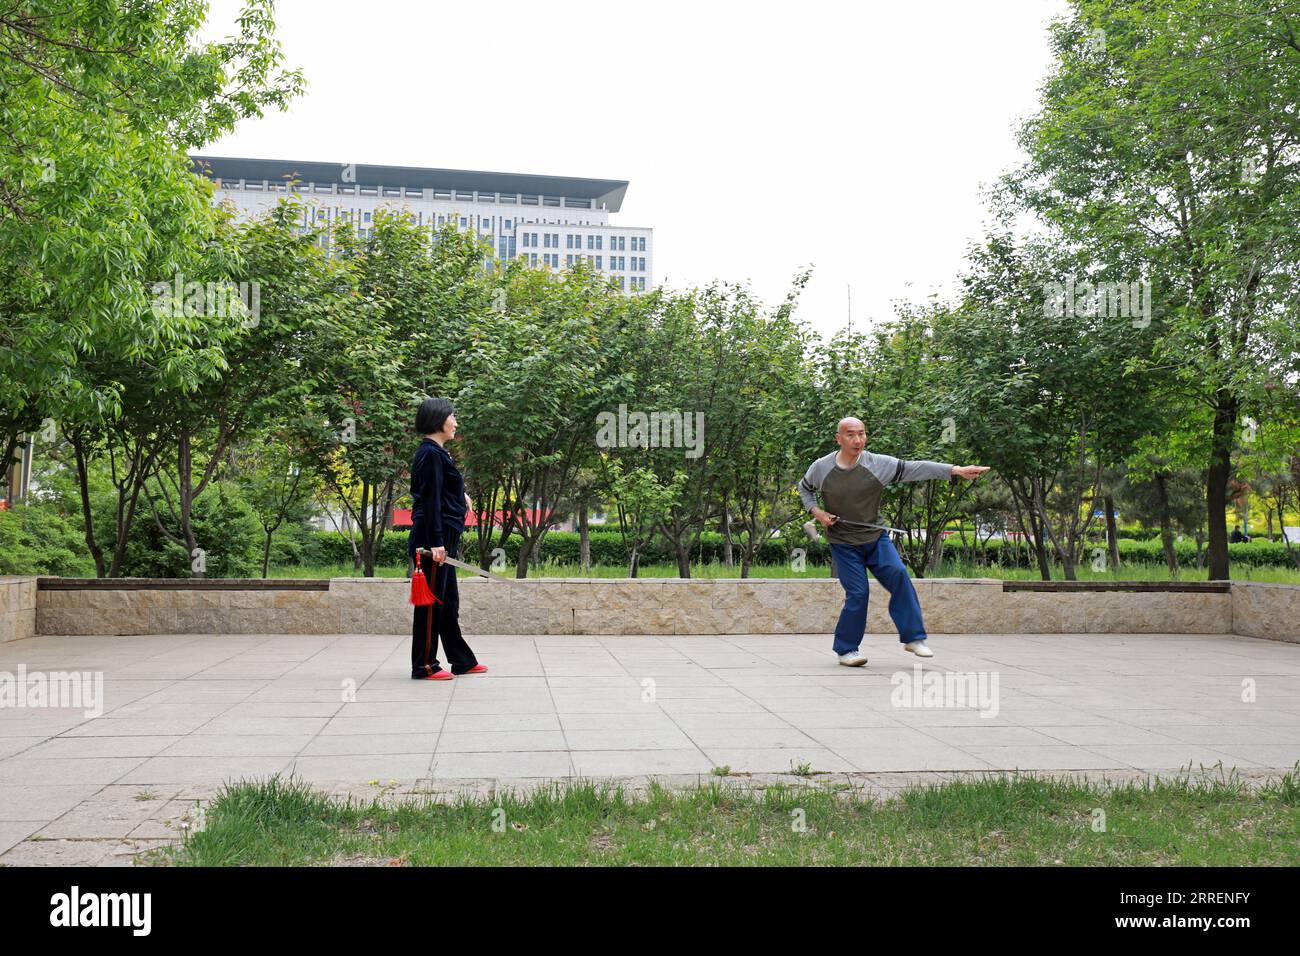 LUANNAN COUNTY, Hebei Province, China - May 4, 2020: two people practice Taiji sword in a park. Stock Photo